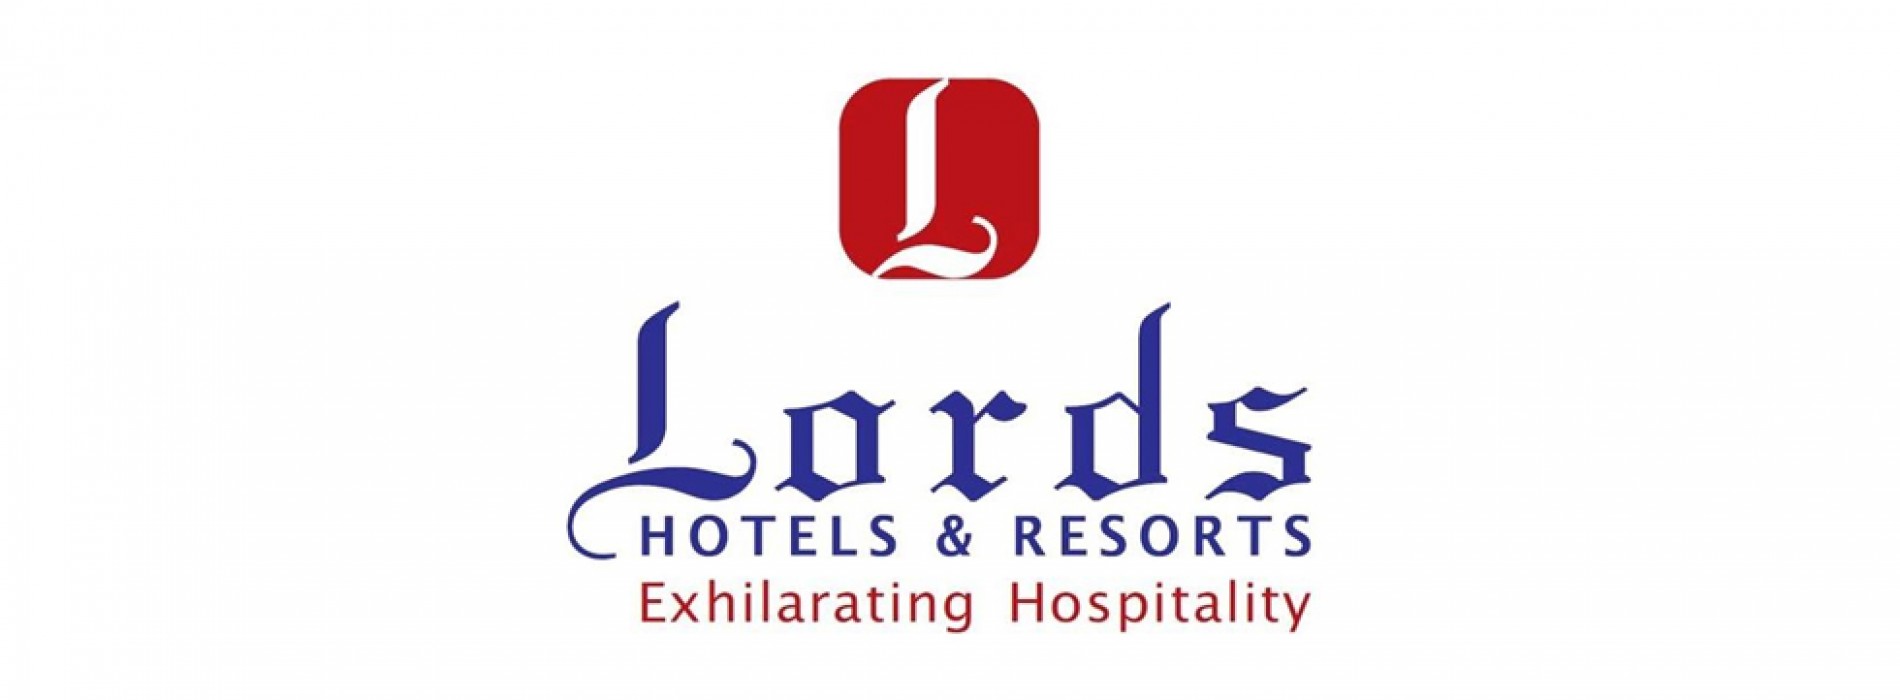 Lords Hotels & Resorts observes World Blood Donors Day